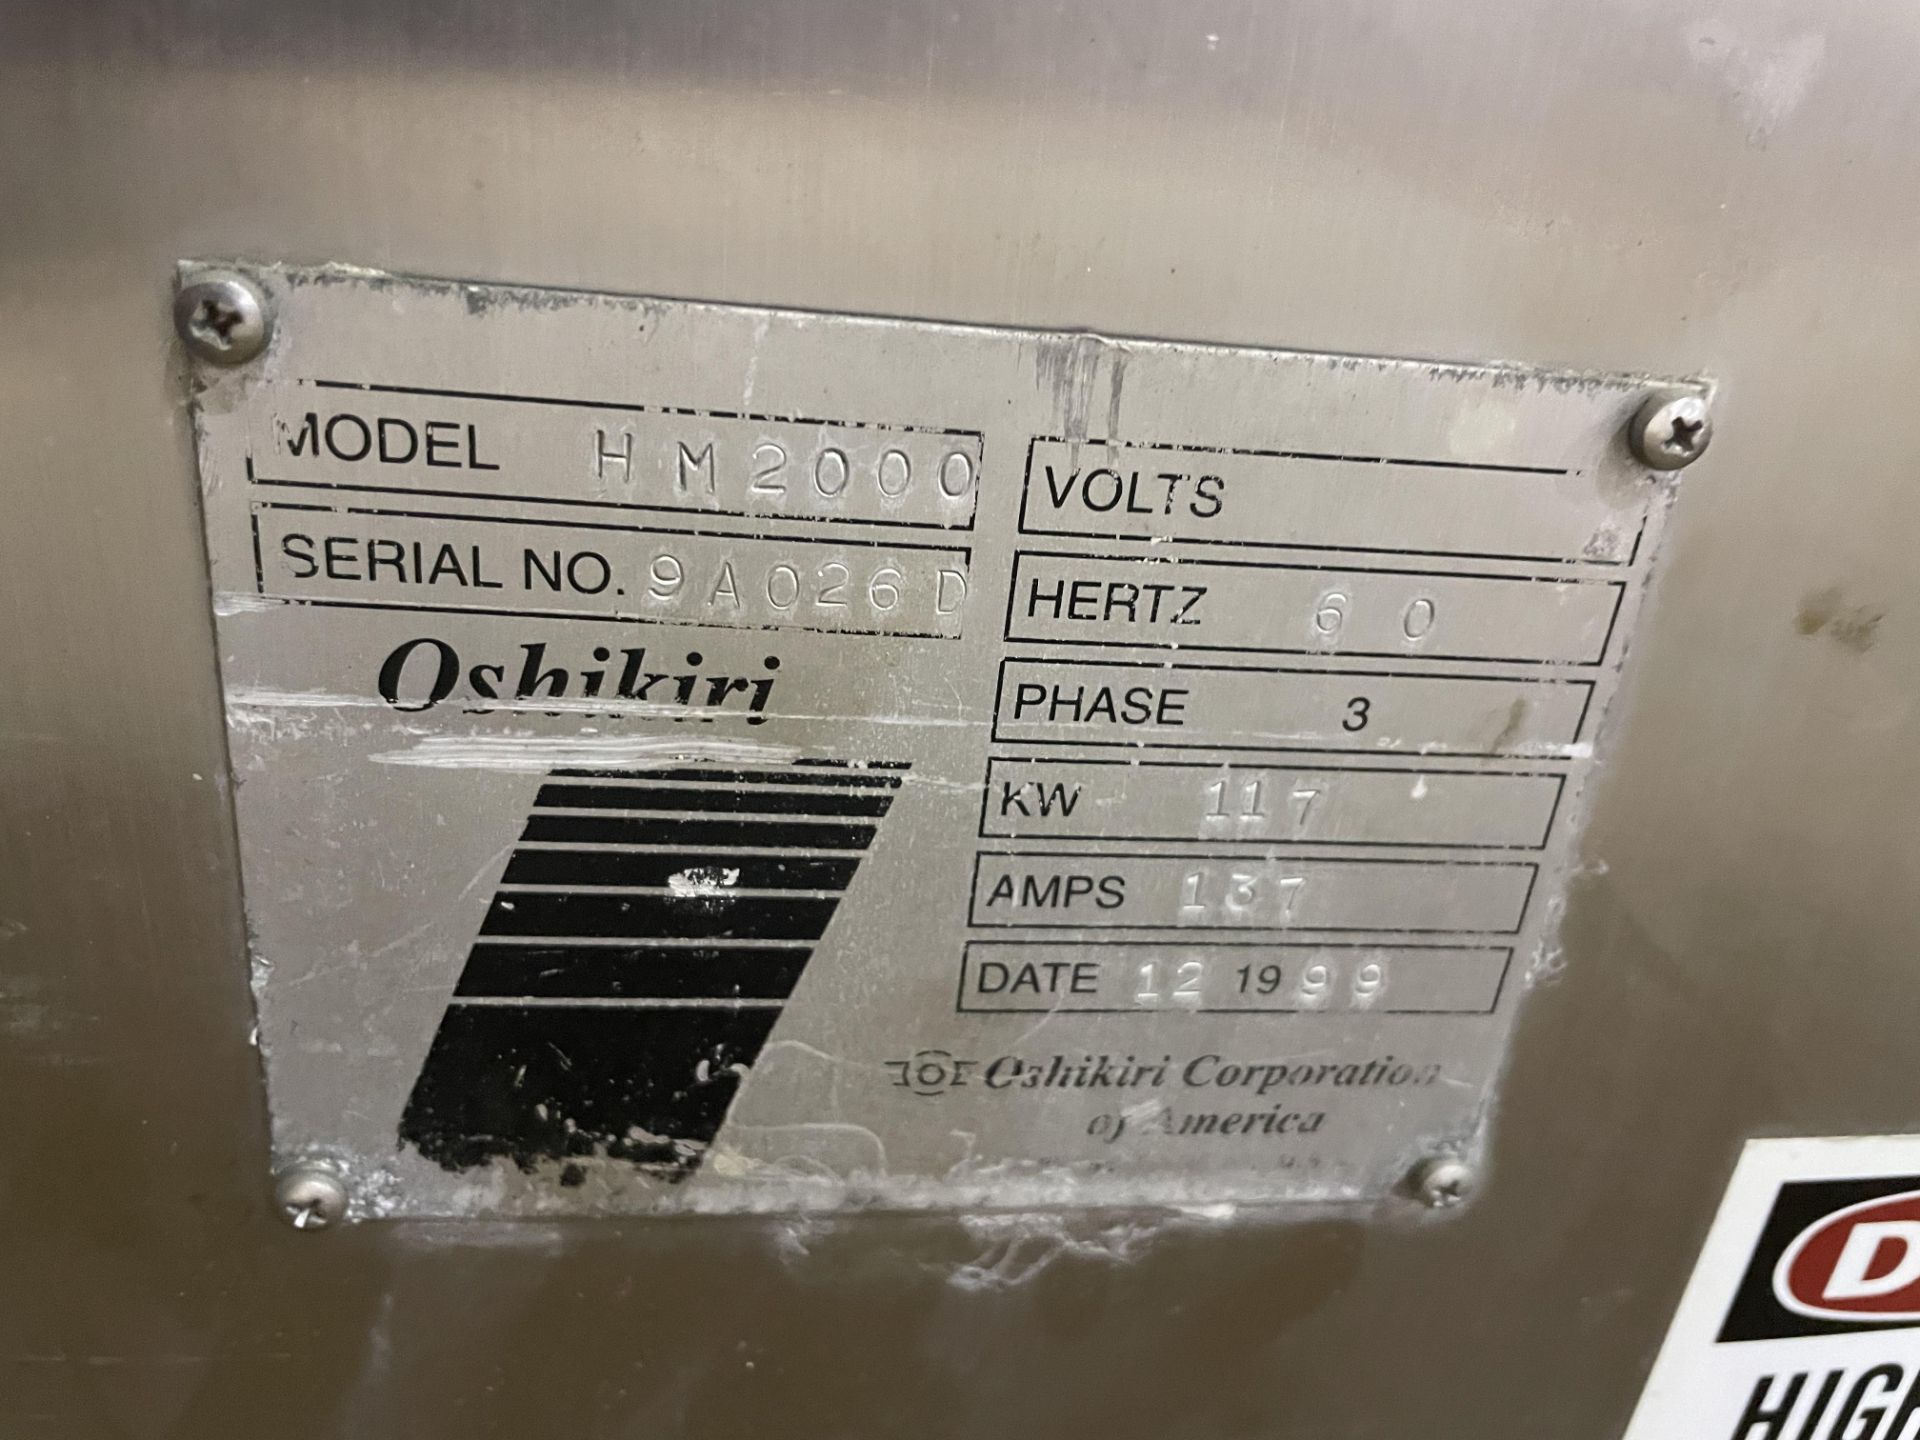 OSHIKIRI MIXER MODELHM2000 SN 9A026D WITH CONTROL PANEL RIGGING/LOADING FEE - $1750 - Image 4 of 13